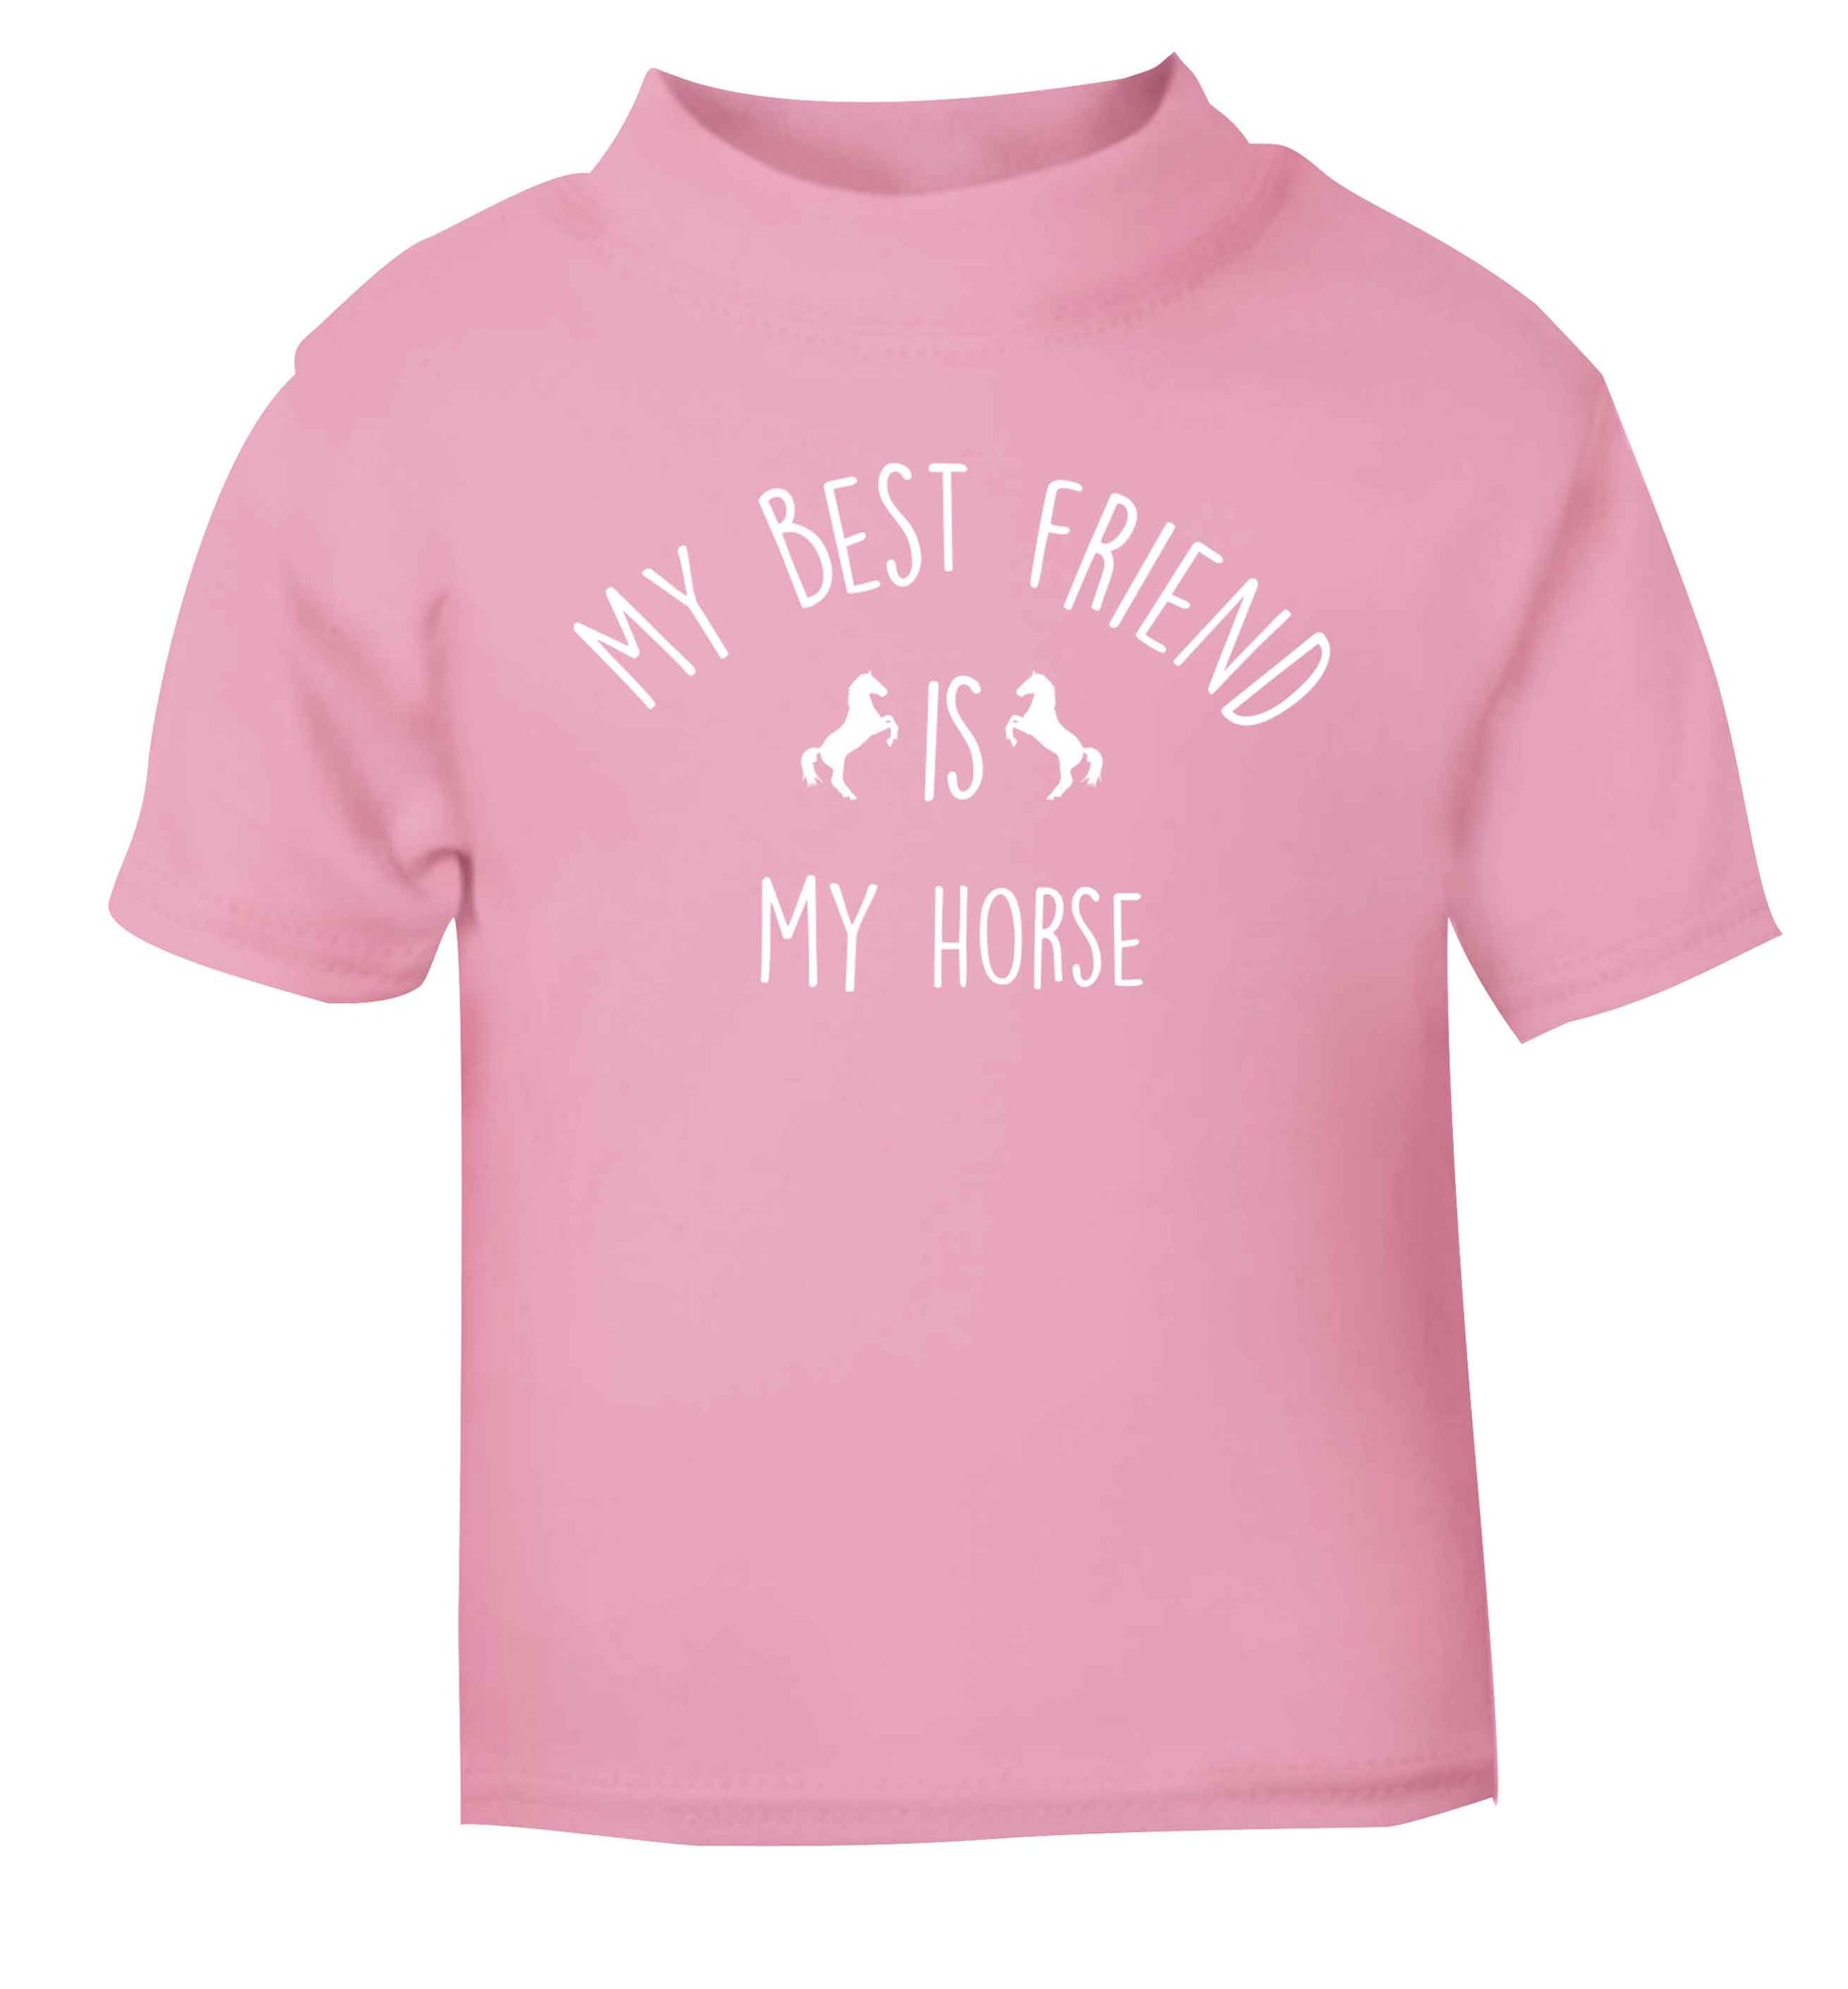 My best friend is my horse light pink baby toddler Tshirt 2 Years